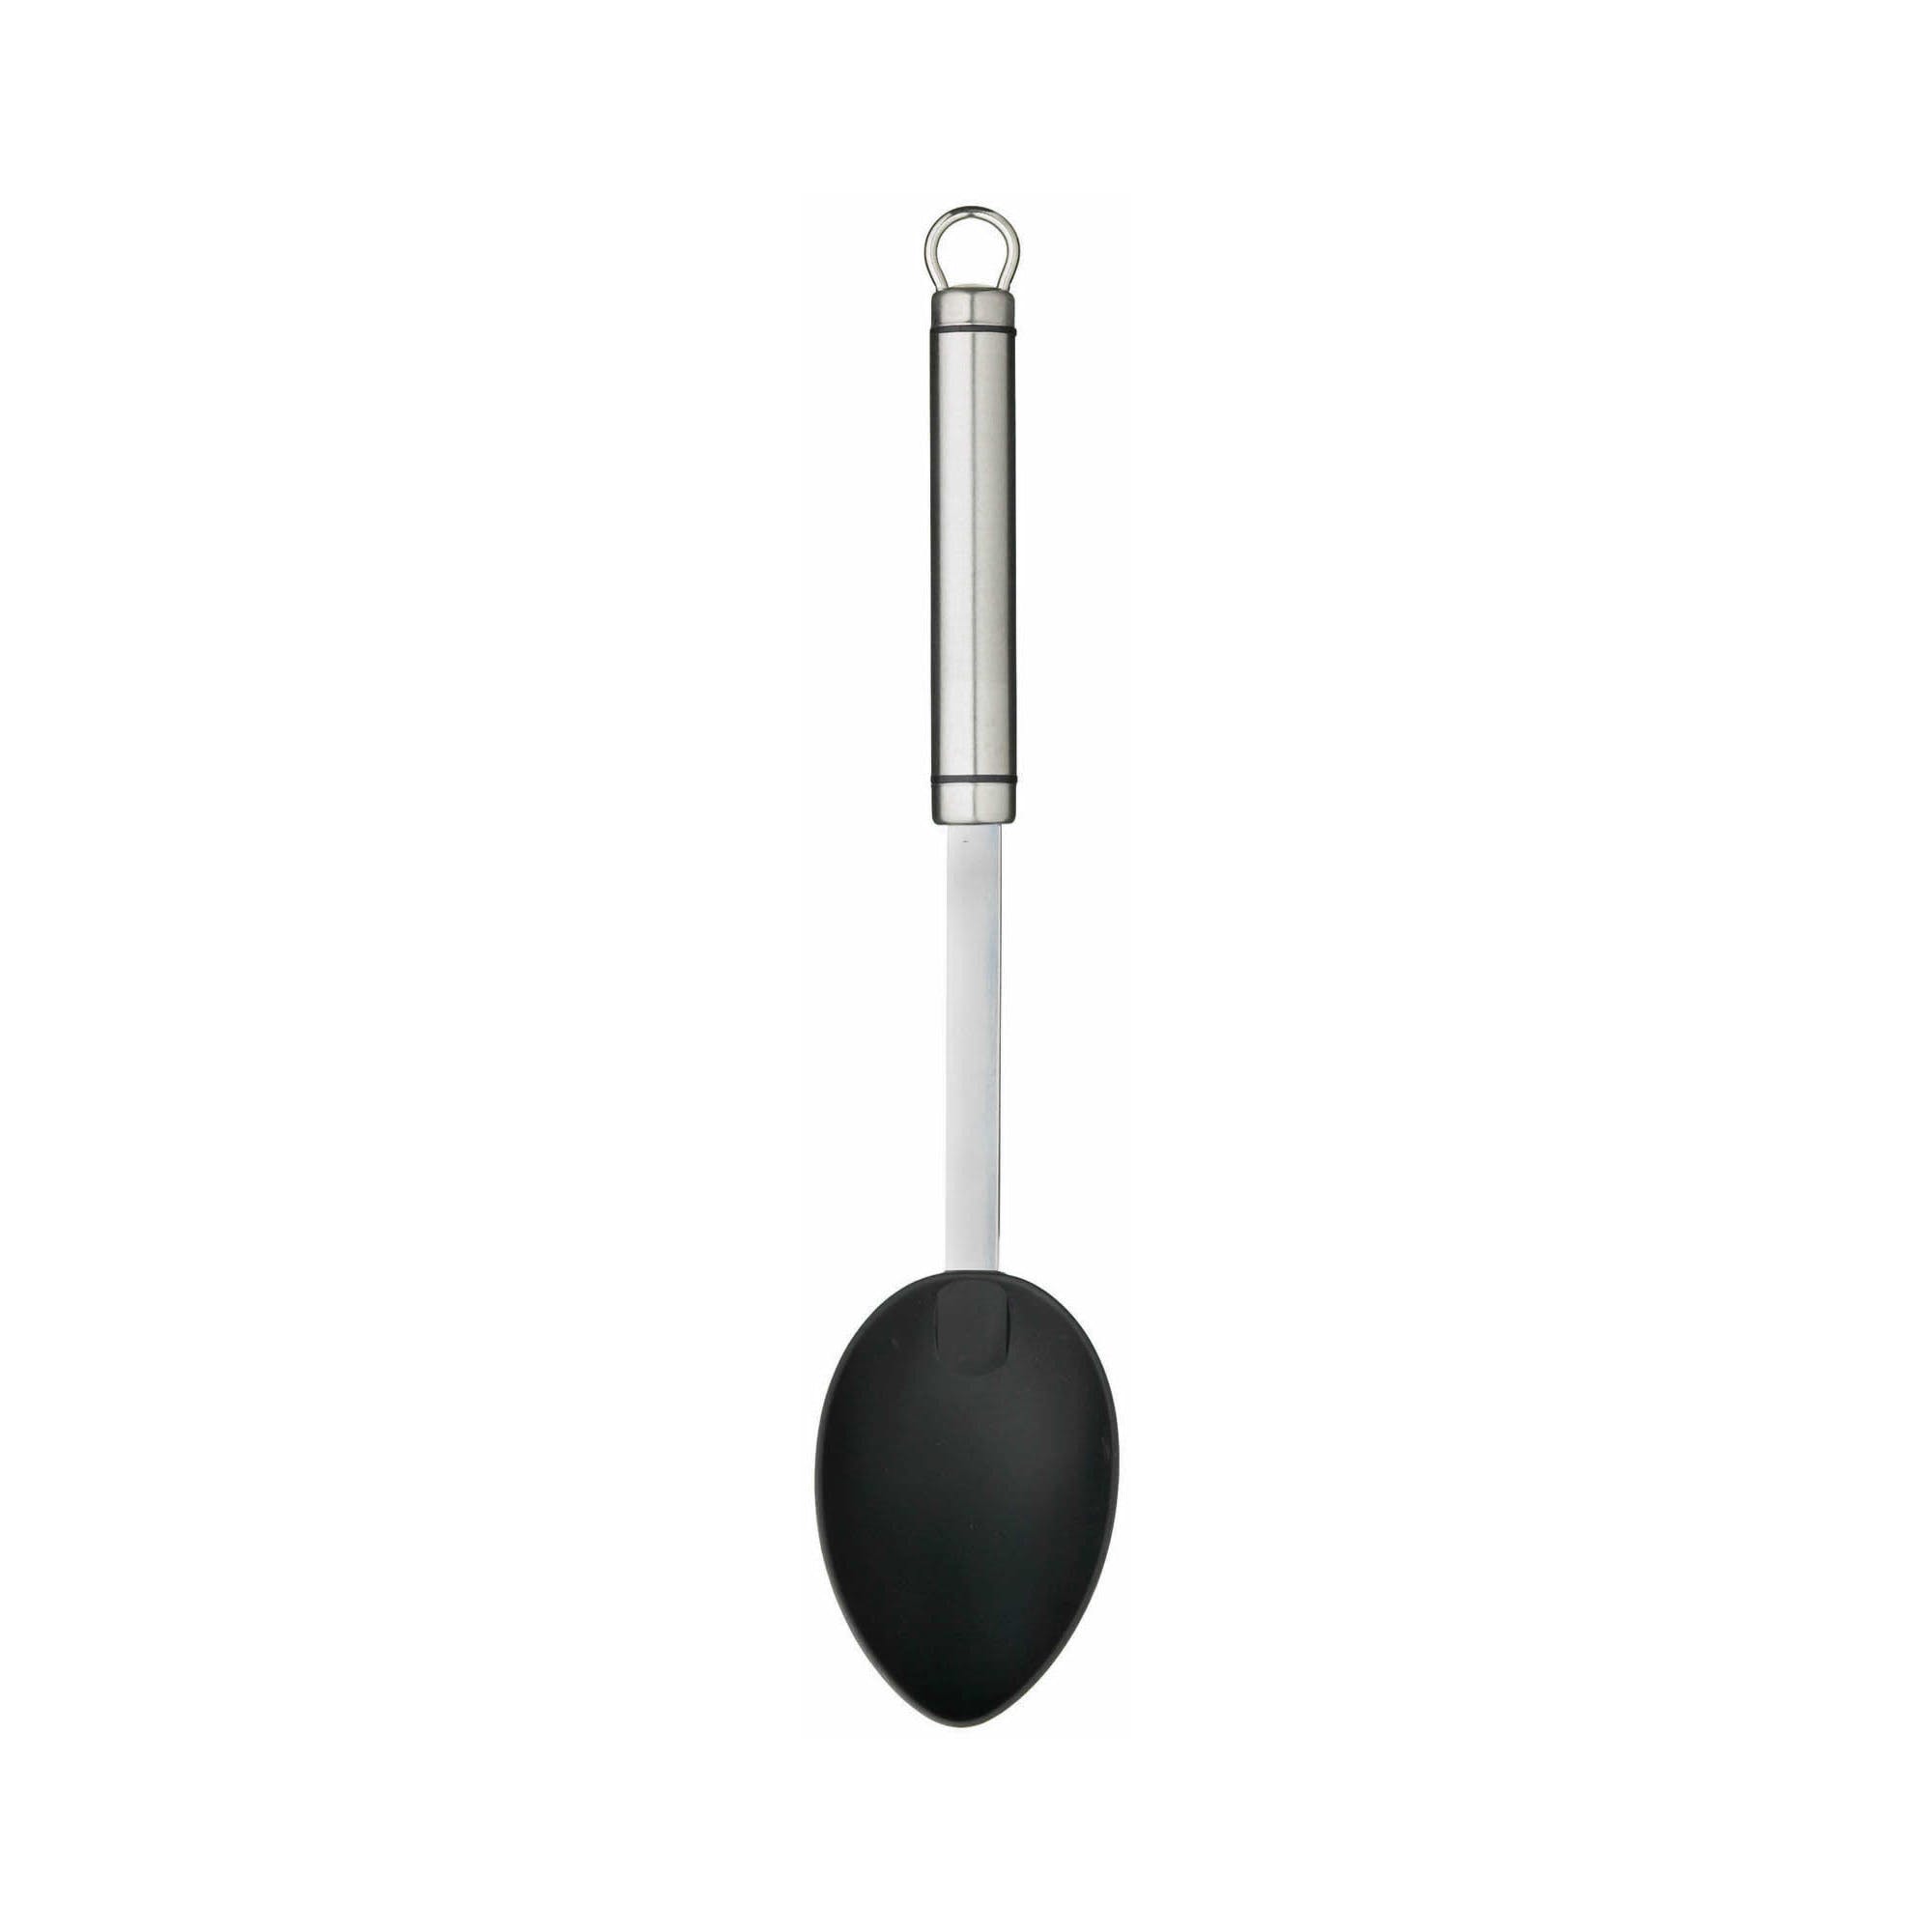 KitchenCraft Oval Handled Stainless Steel Non-Stick Cooking Spoon - The Cooks Cupboard Ltd